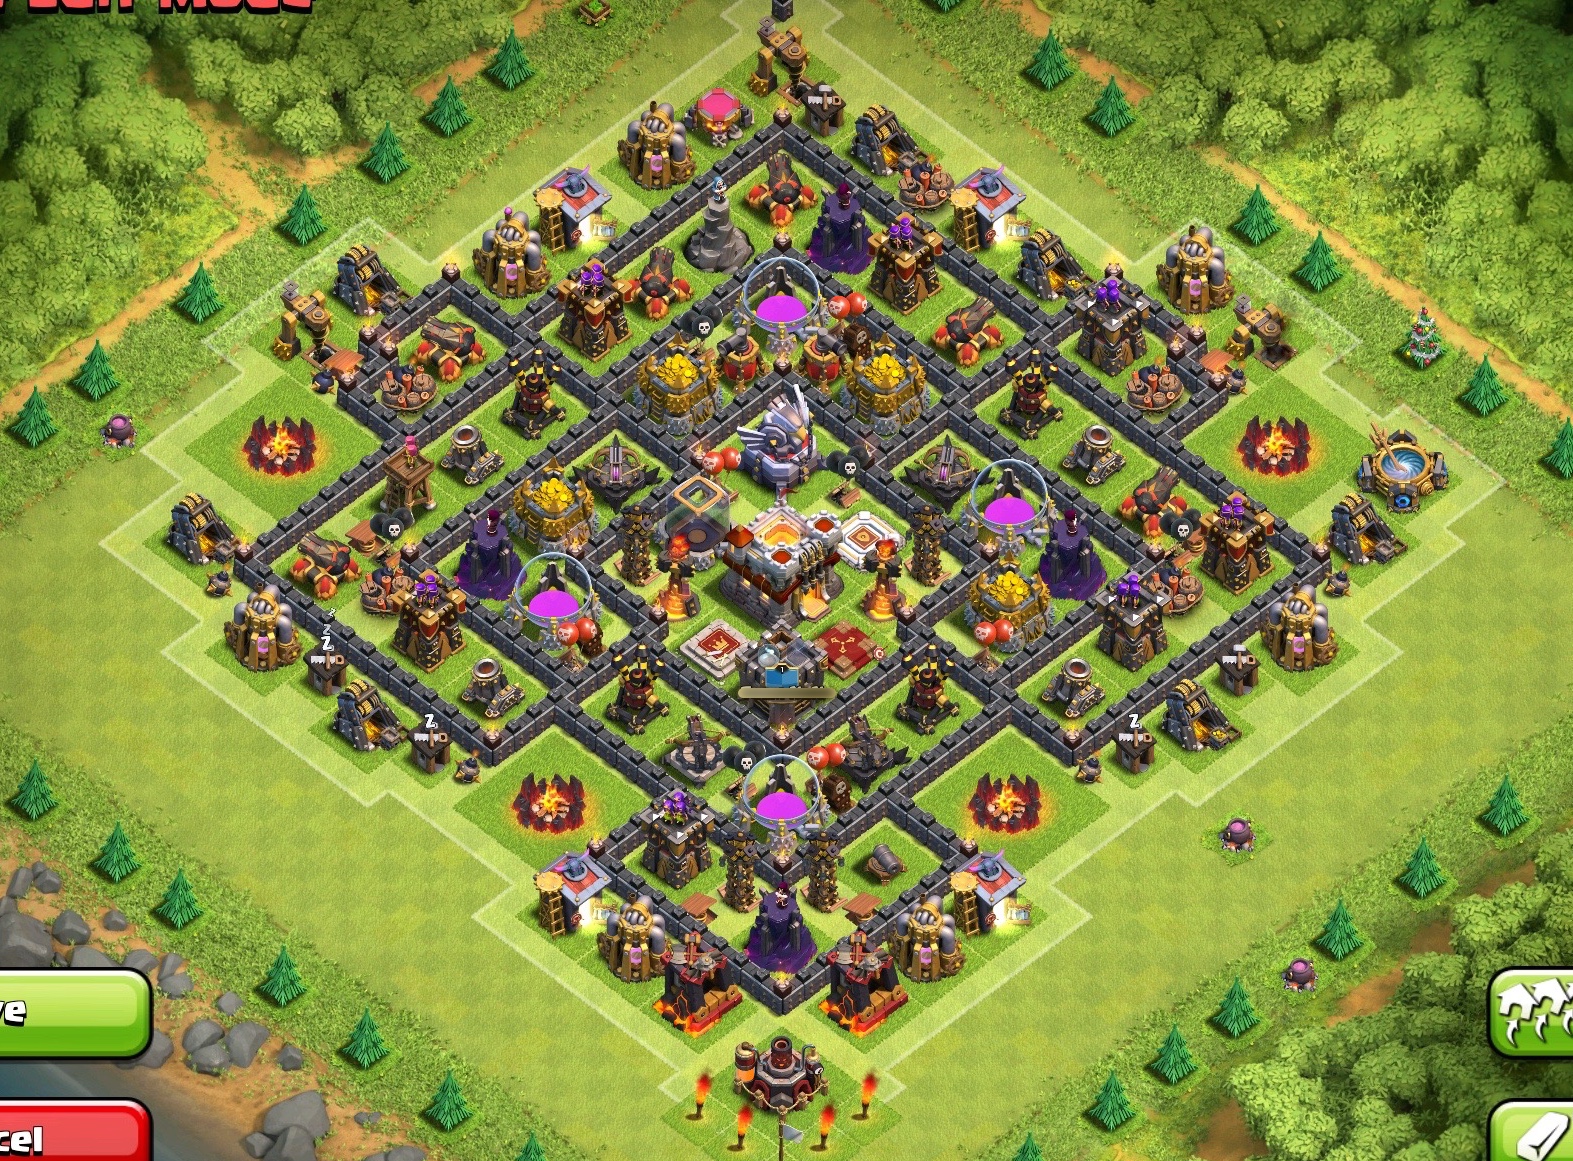 Clash of clans/coc top 3 th11 town hall troll base designs/layouts august.....